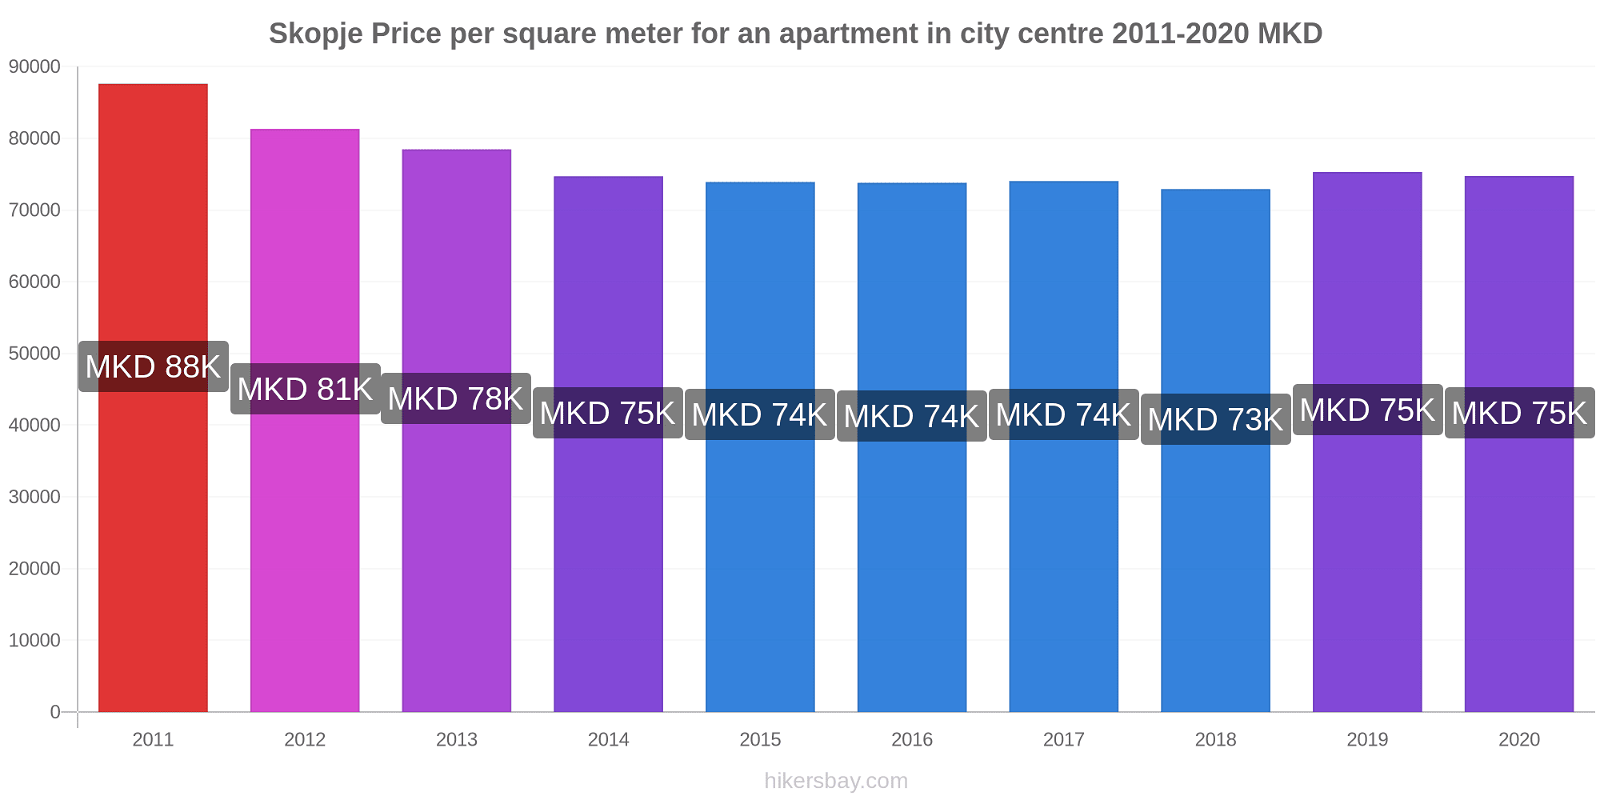 Skopje price changes Price per square meter for an apartment in city centre hikersbay.com